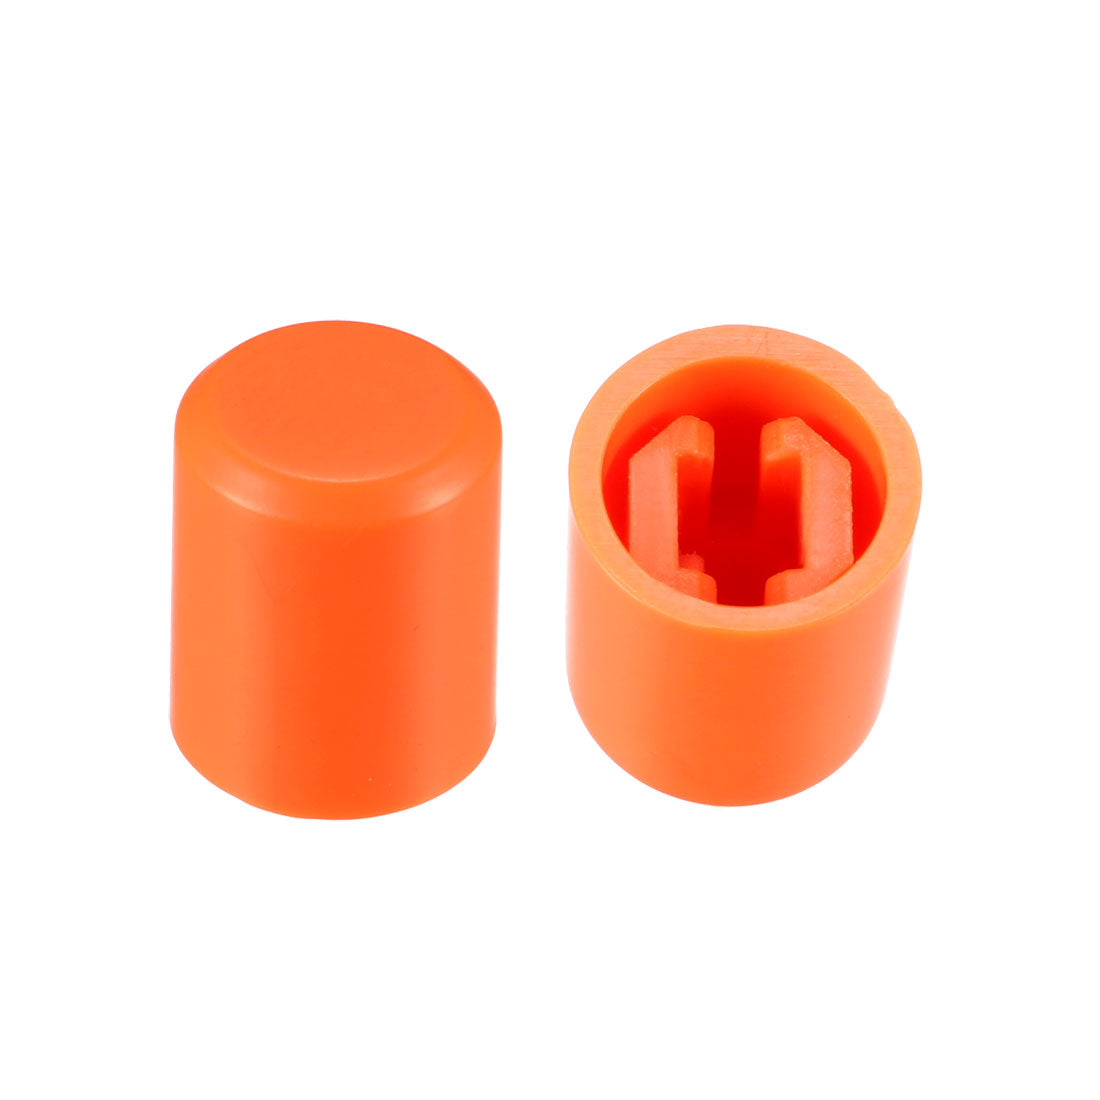 uxcell Uxcell 20Pcs 3.1mm Hole Dia Plastic Push Button Tactile Switch Caps Cover Keycaps Protector Orange for 6x6 Tact Switch